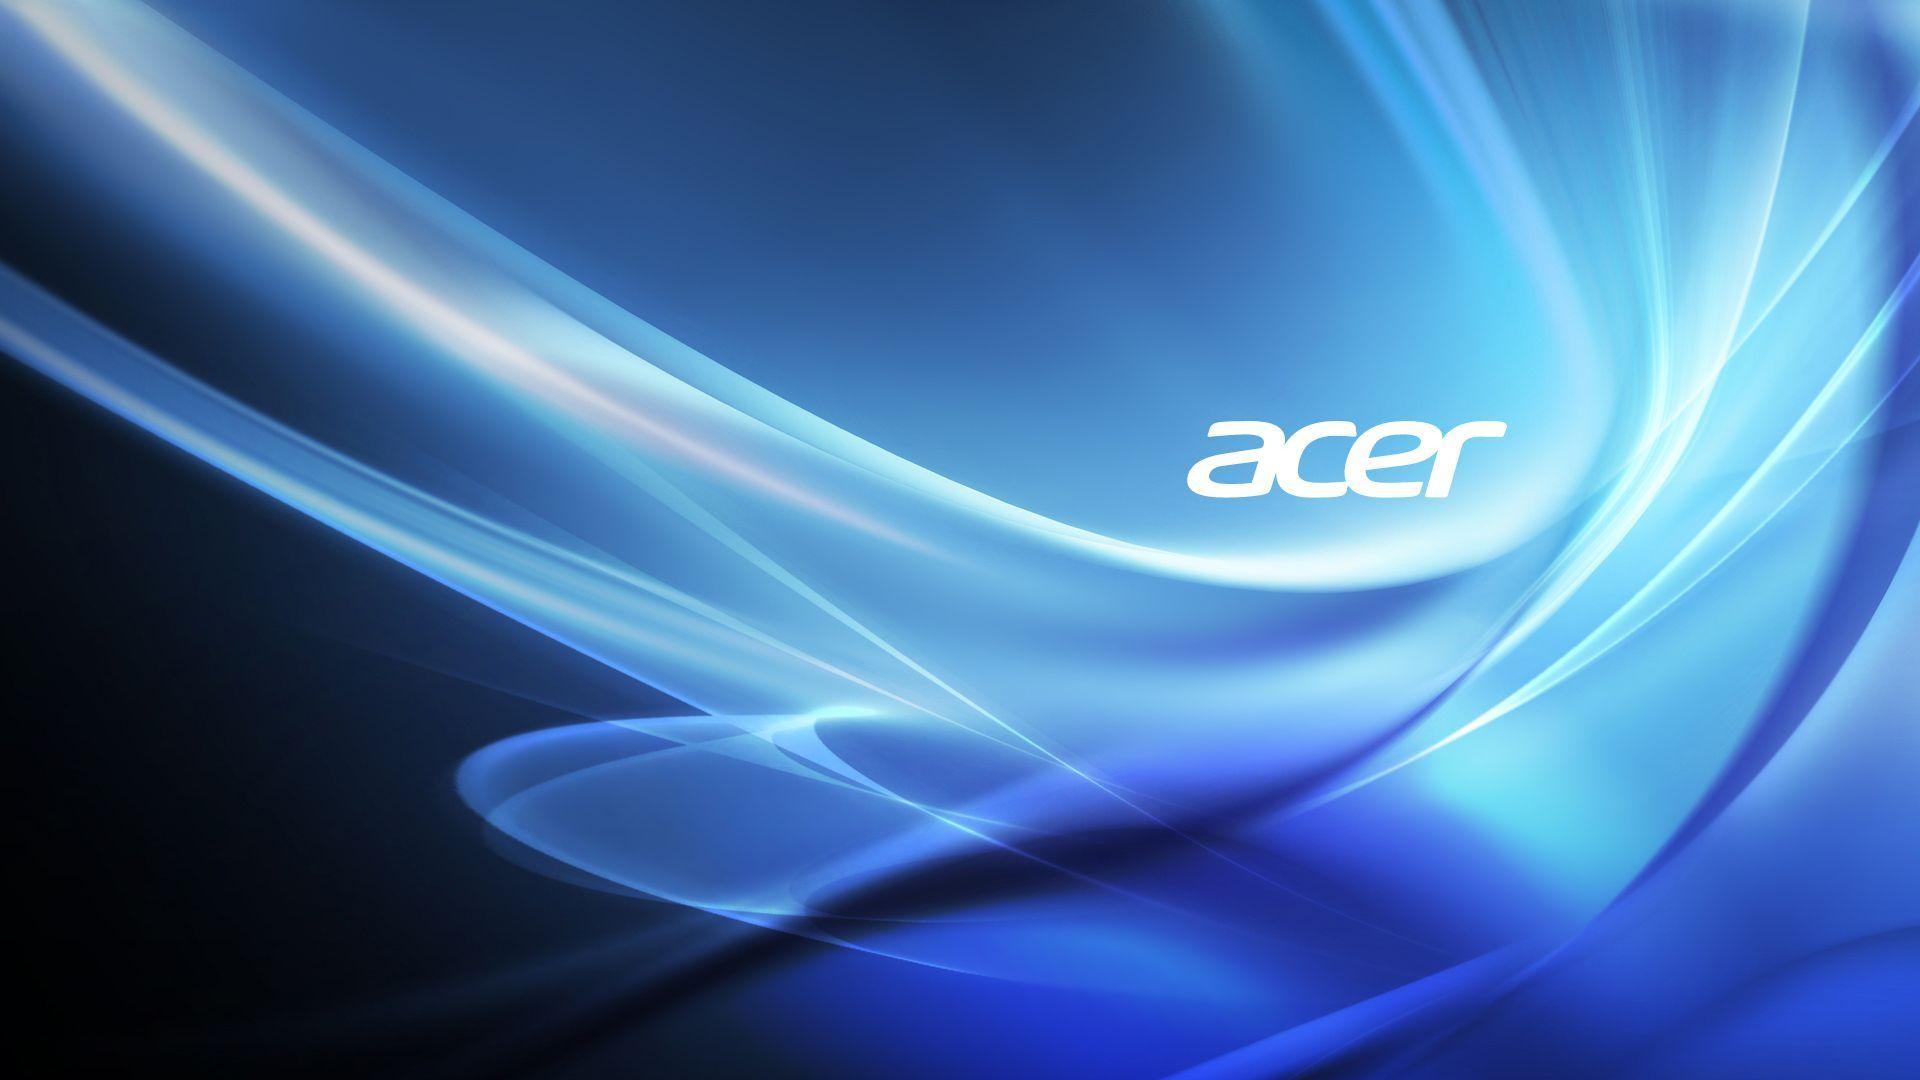 acer wallpapers for windows 7 free download